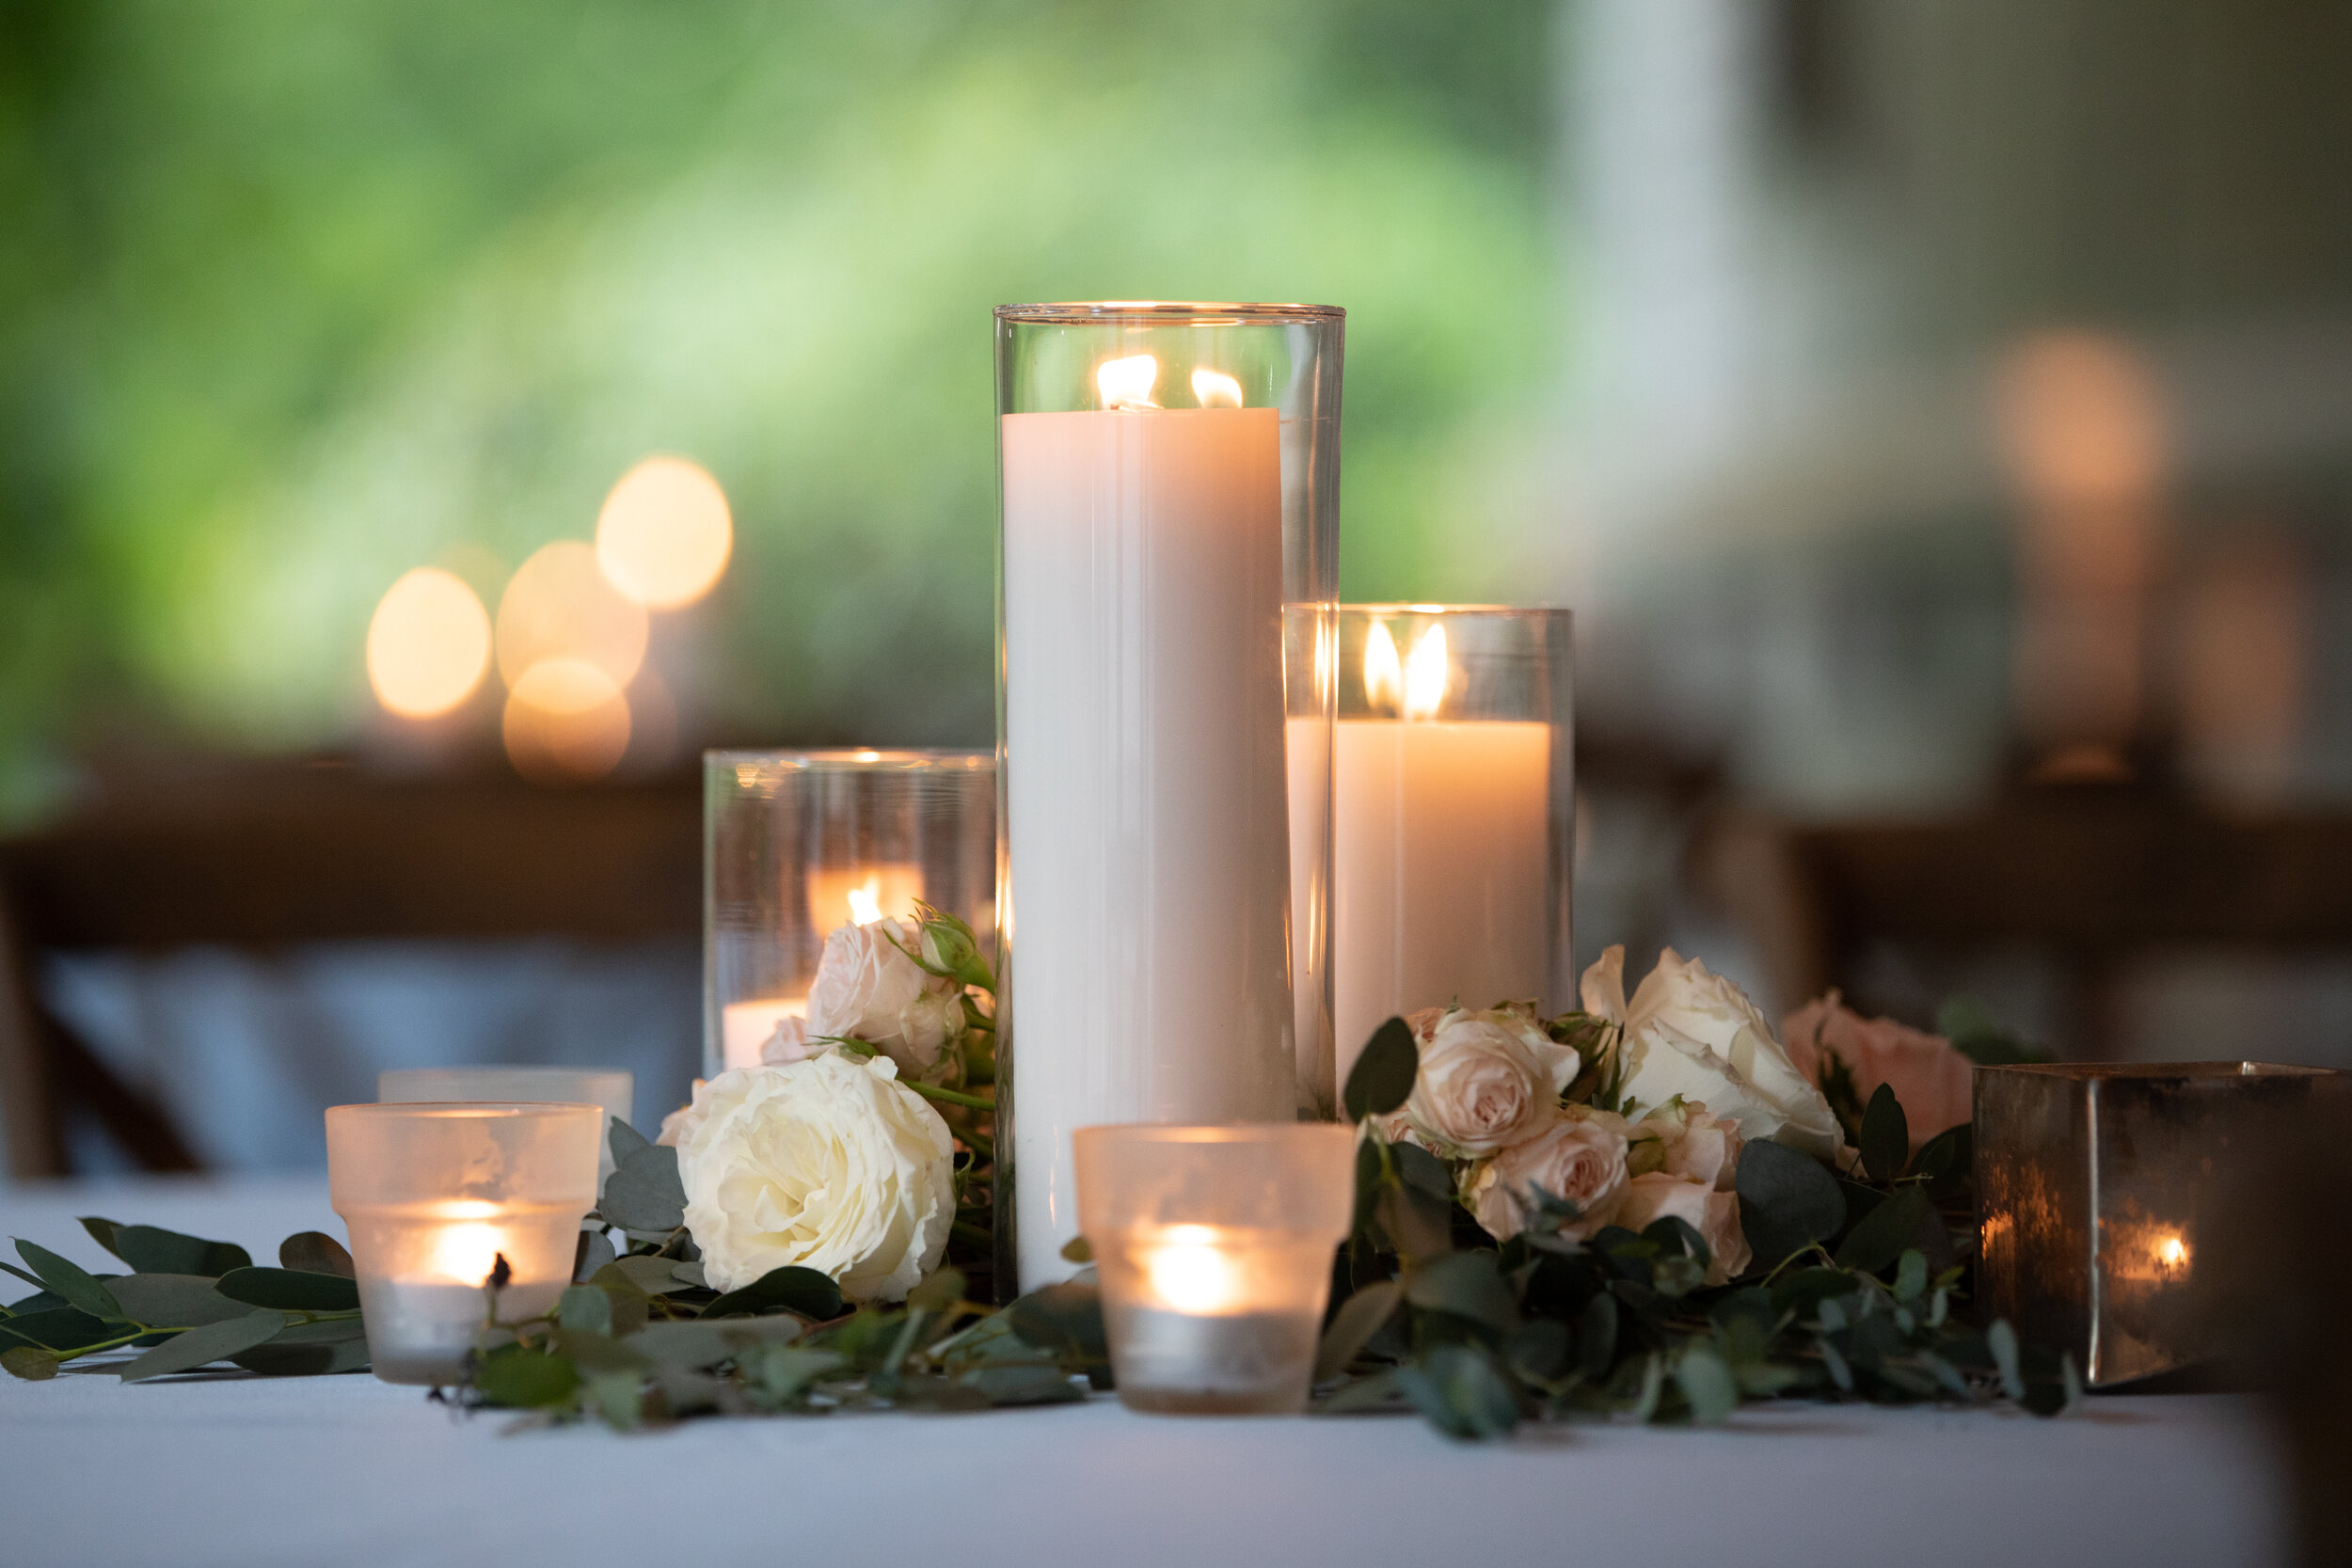 Pillar candle centerpieces with lush greenery and blush and ivory flowers. Belle Meade Plantation wedding florist.